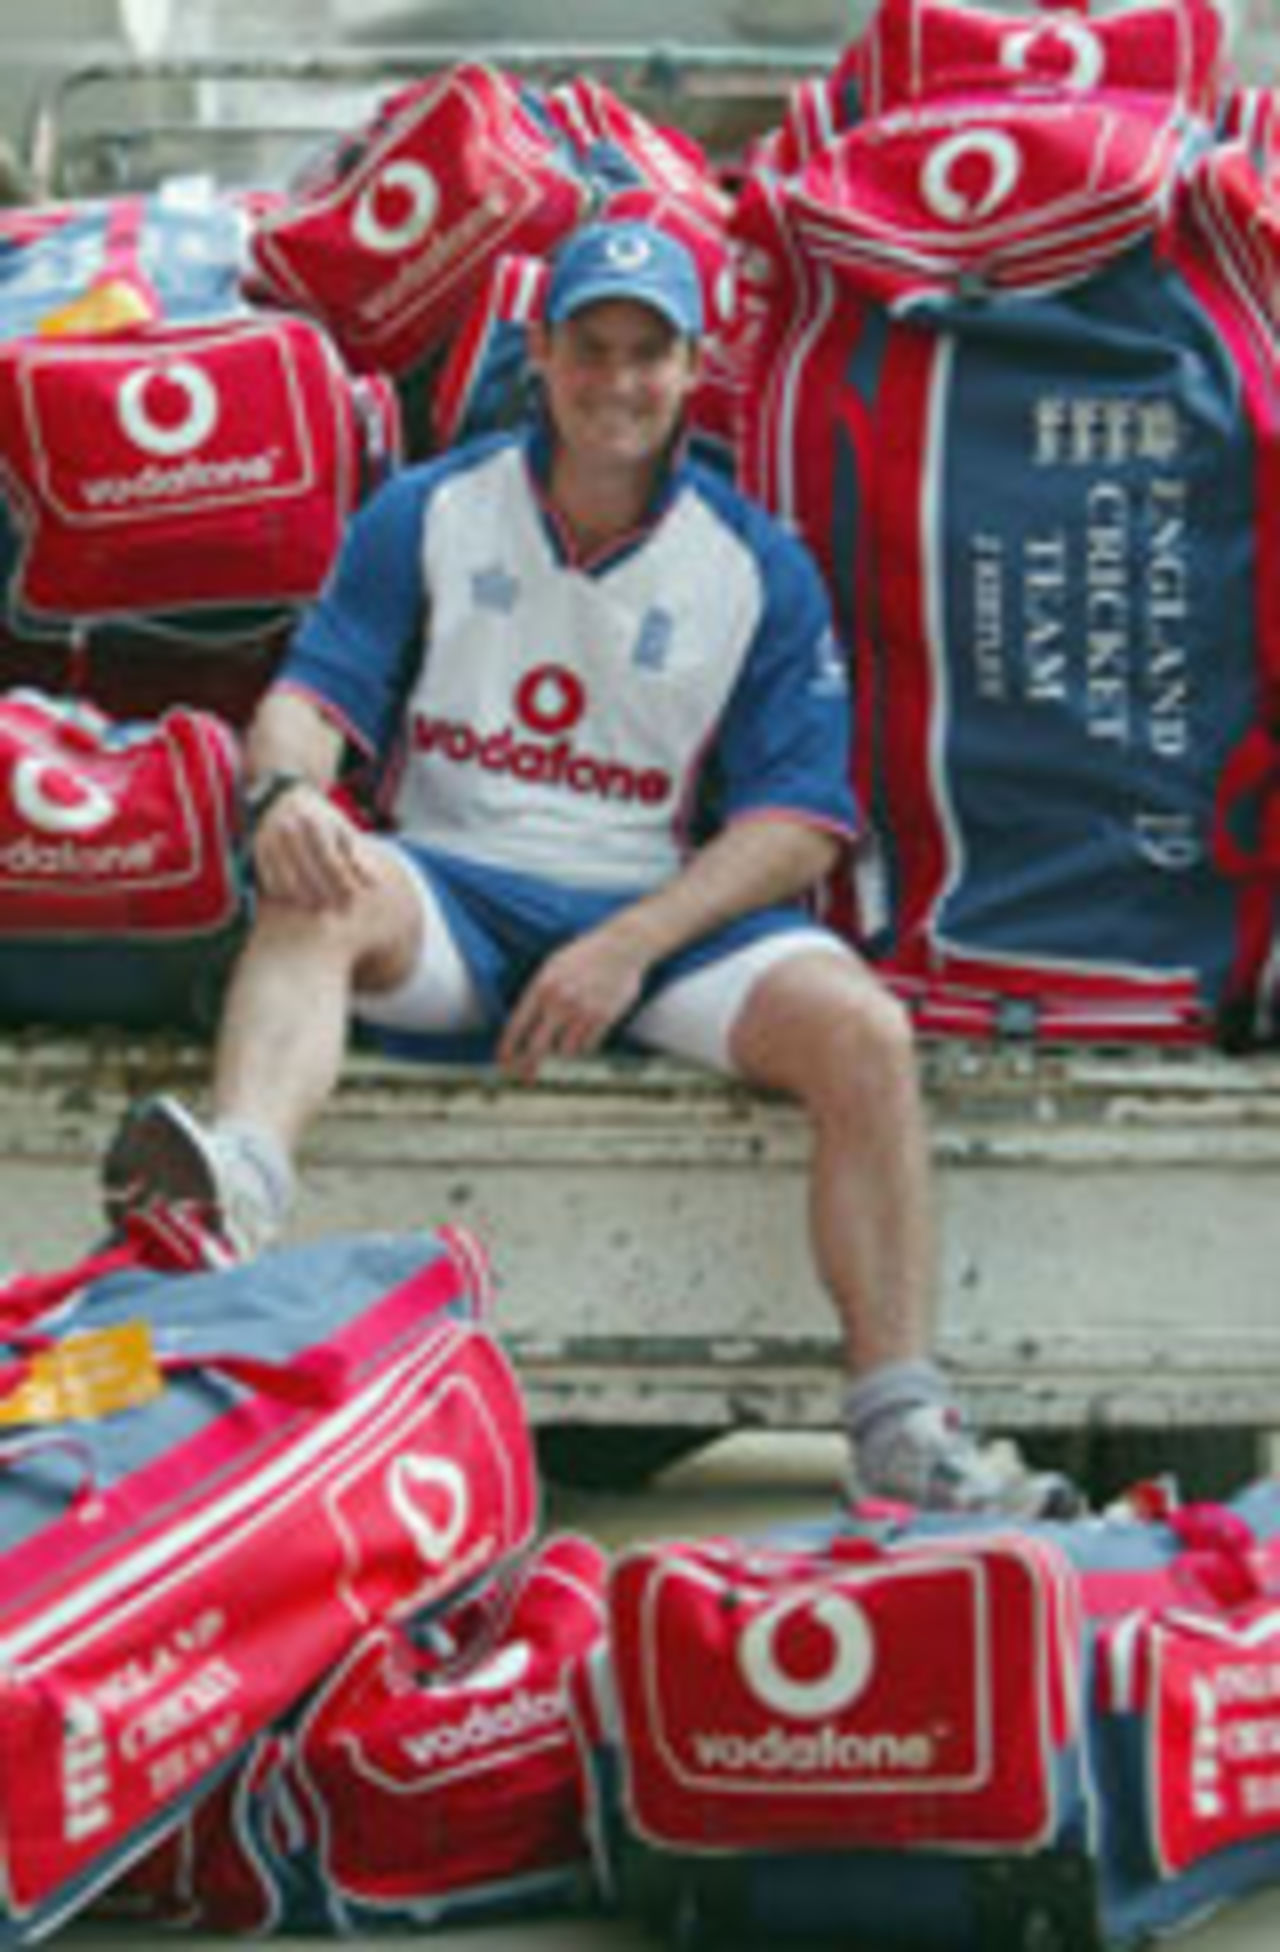 Andy Strauss surrounded by England kit bags, Chittagong, November 6, 2003